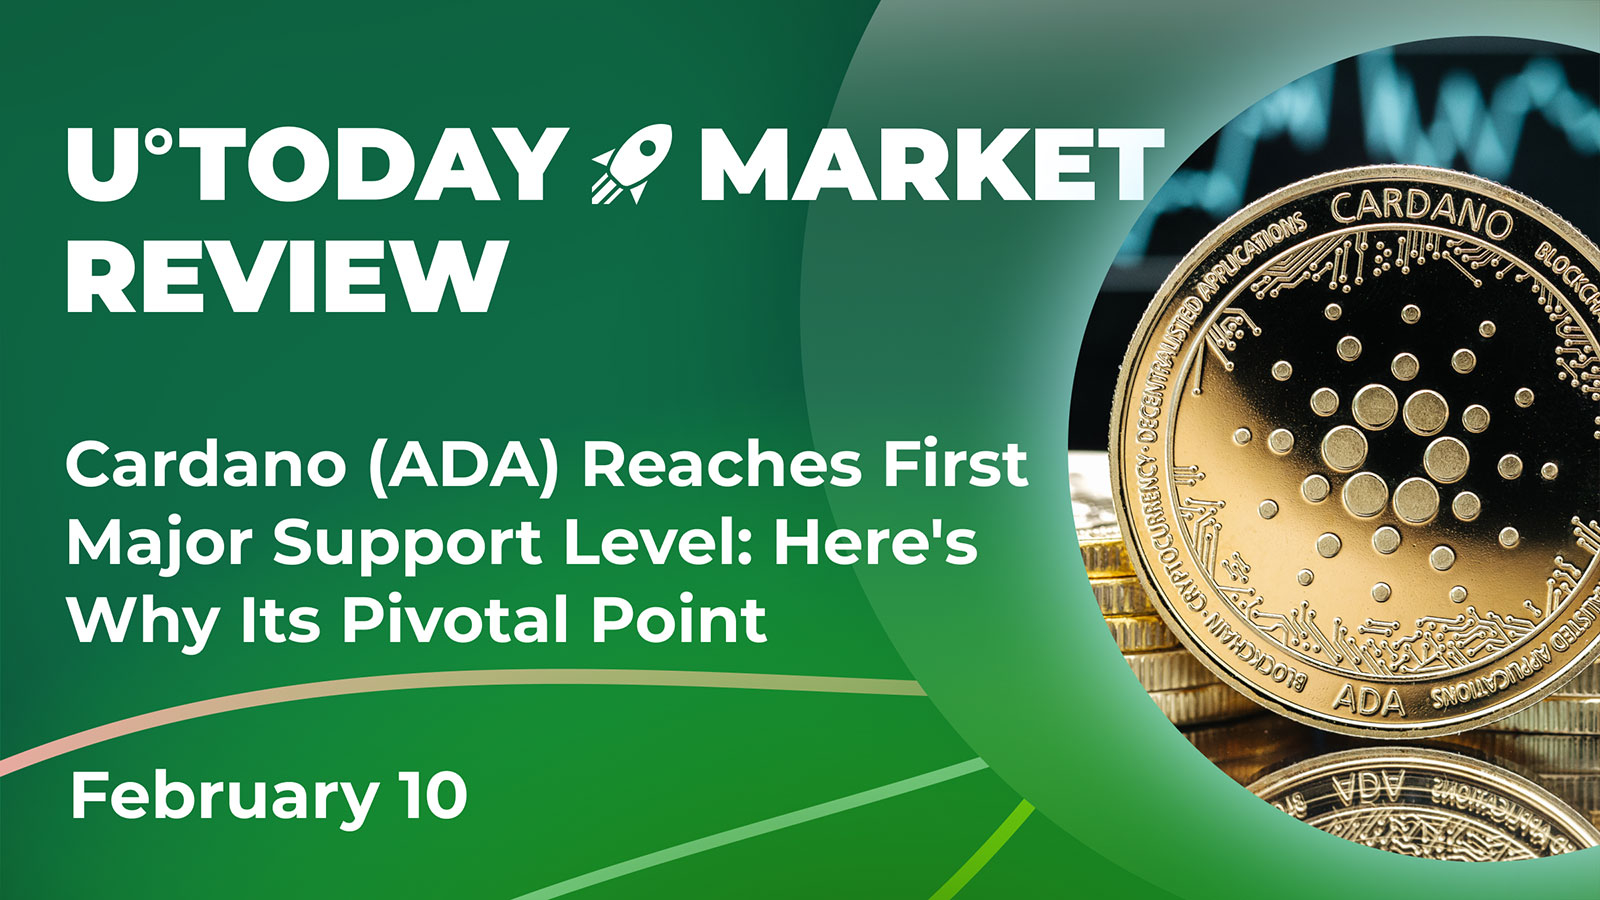 Cardano (ADA) Reaches First Major Support Level: Here's Why This Is Pivotal